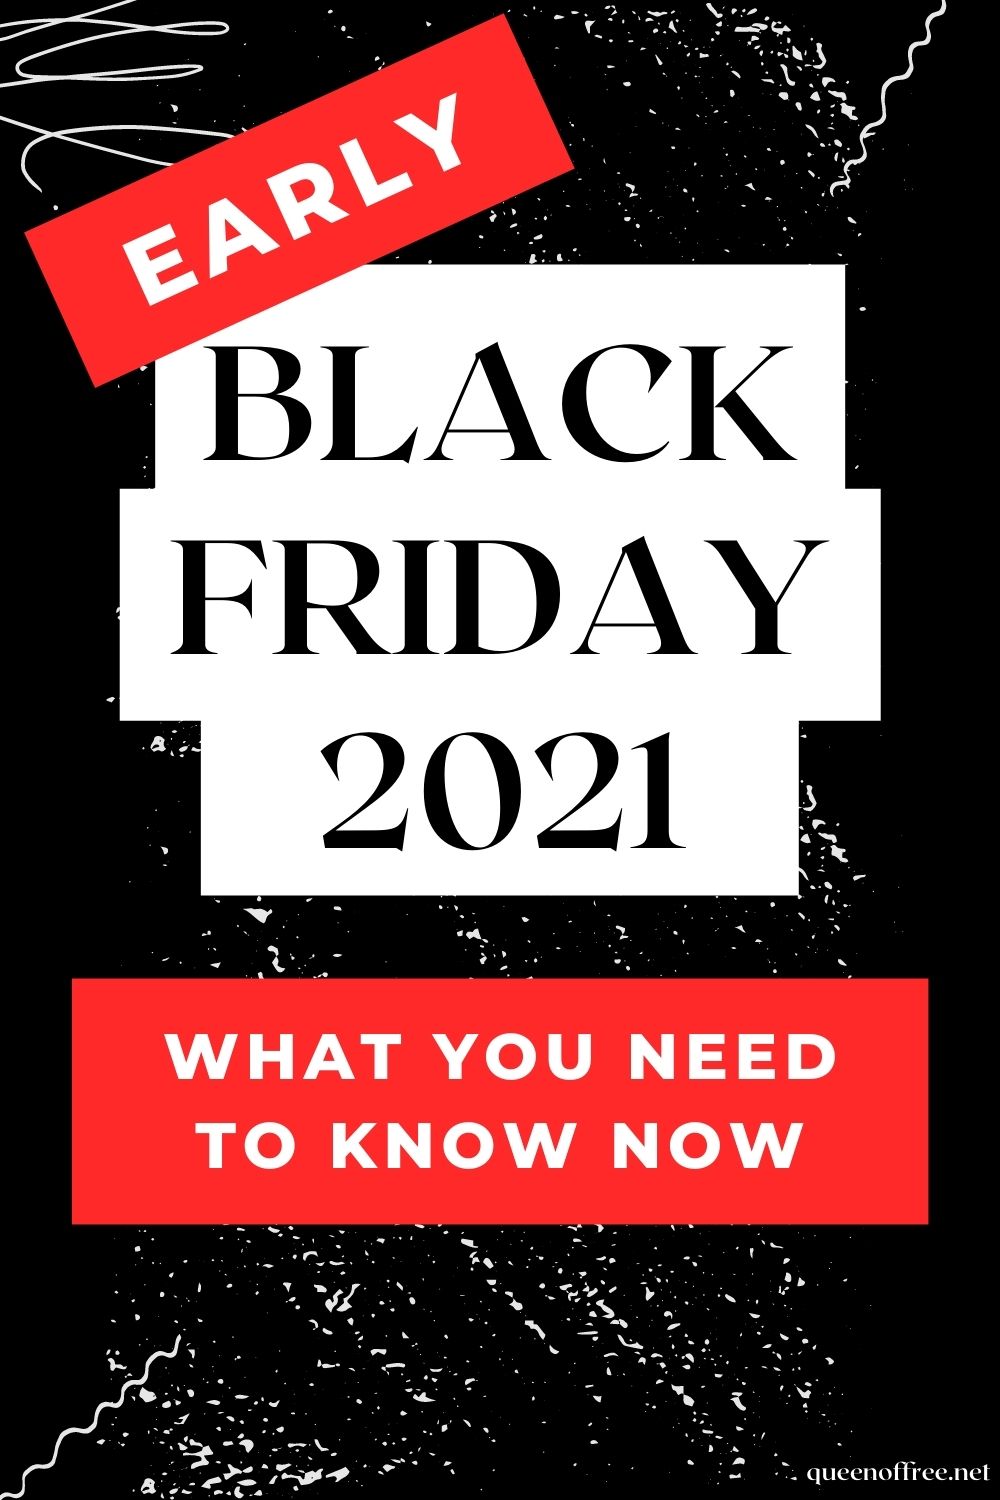 The deals are already here! Shop early Black Friday 2021 with these essential tips to help you save even more money.